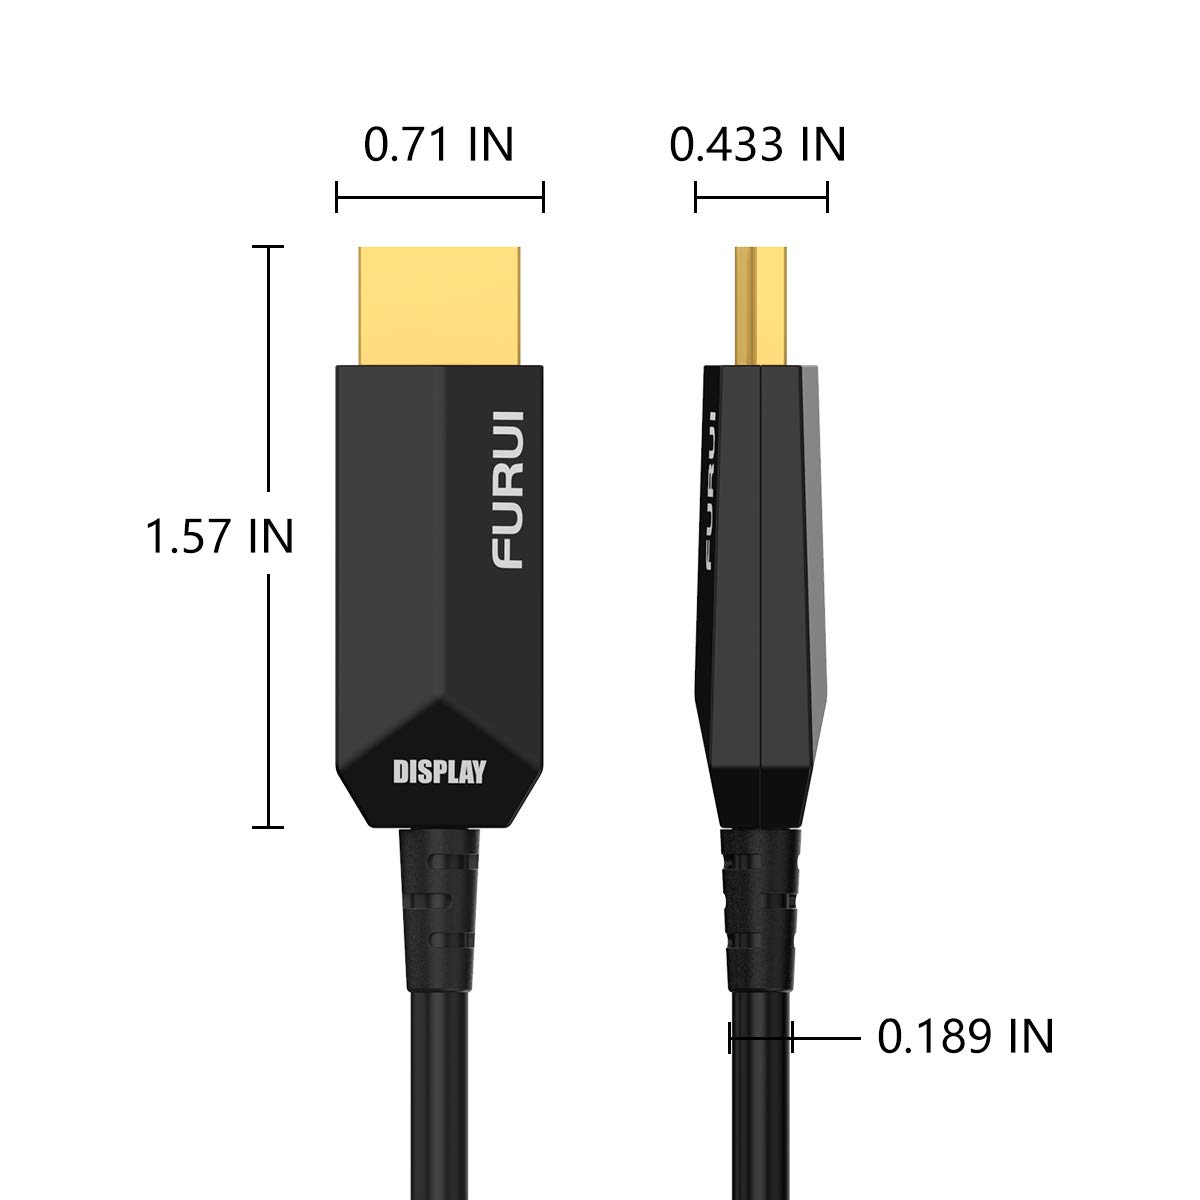 8K Fiber HDMI Cable 33ft, FURUI Fiber Optic HDMI 2.1 Cable [8K@60Hz,4K@120Hz], 48Gbps, Dynamic HDR, eARC, BT.2020 Compatible with RTX 3080/3090 Xbox Series X PS5 Denon AV Receiver LG Samsung Sony TV